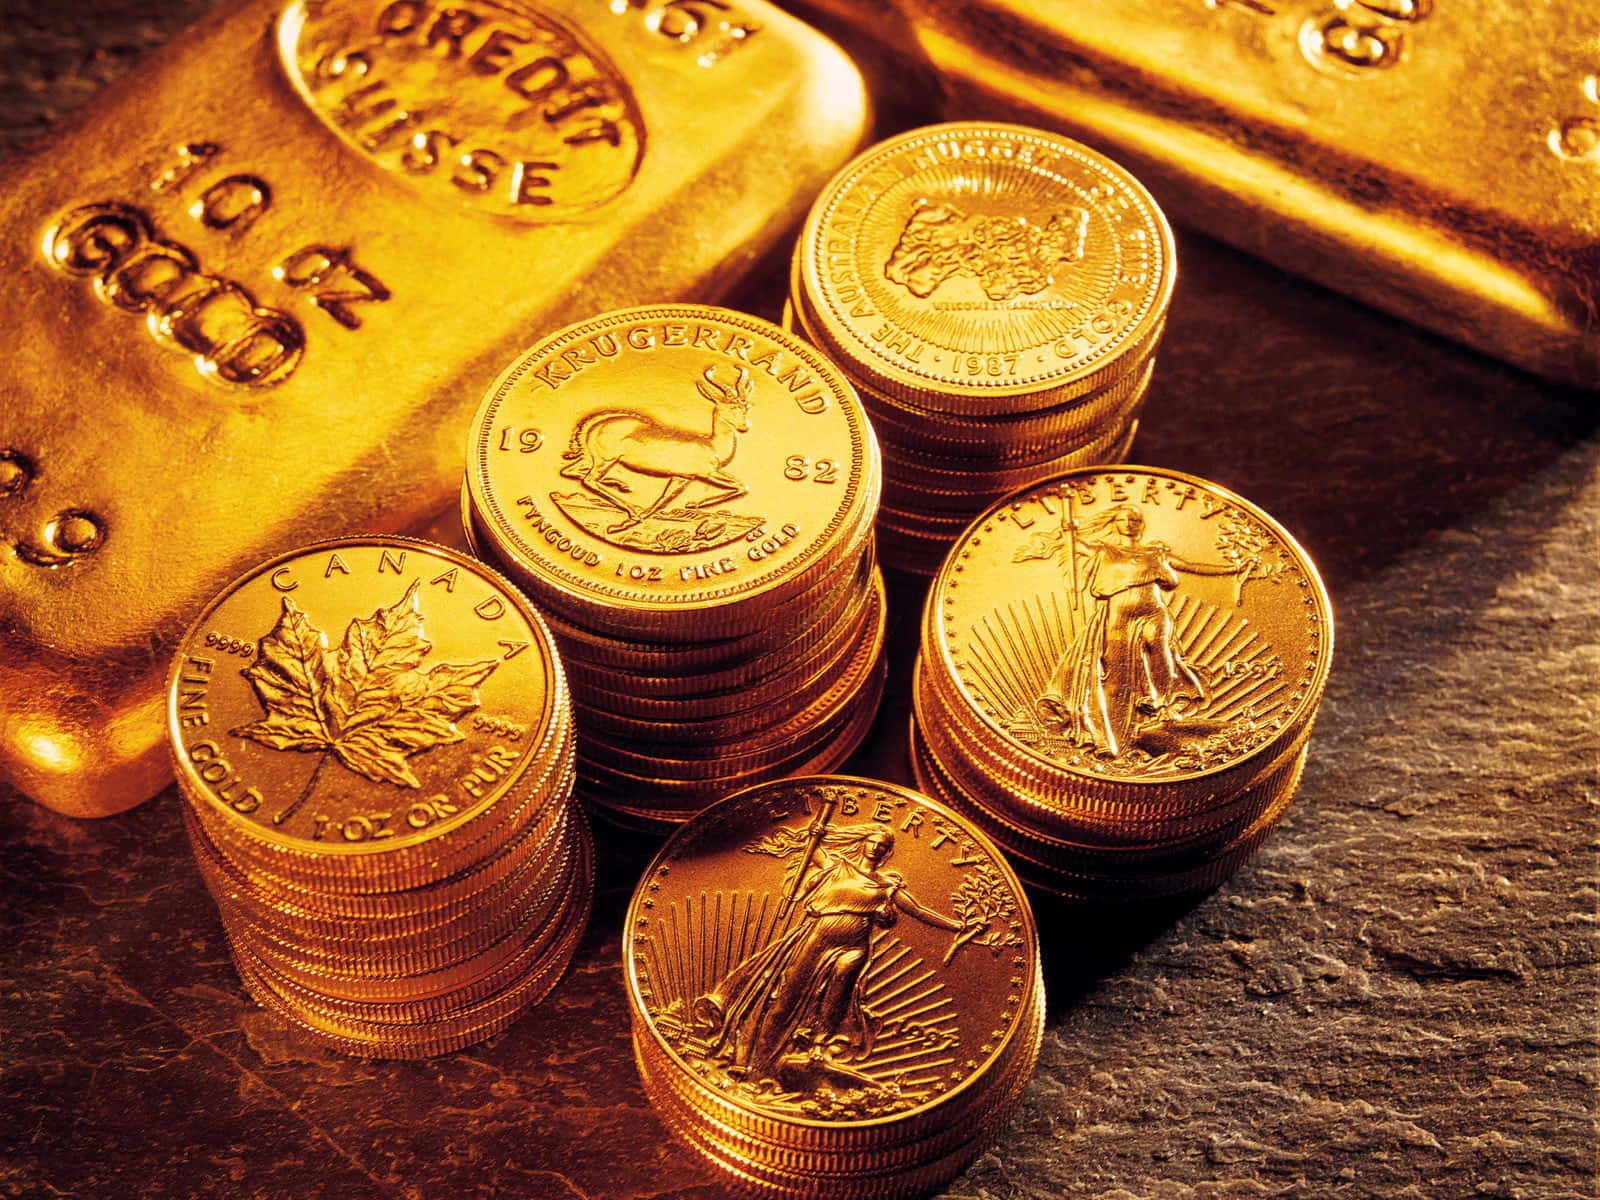 Deeply rooted in its history, gold has enchanted rulers and commoners alike.